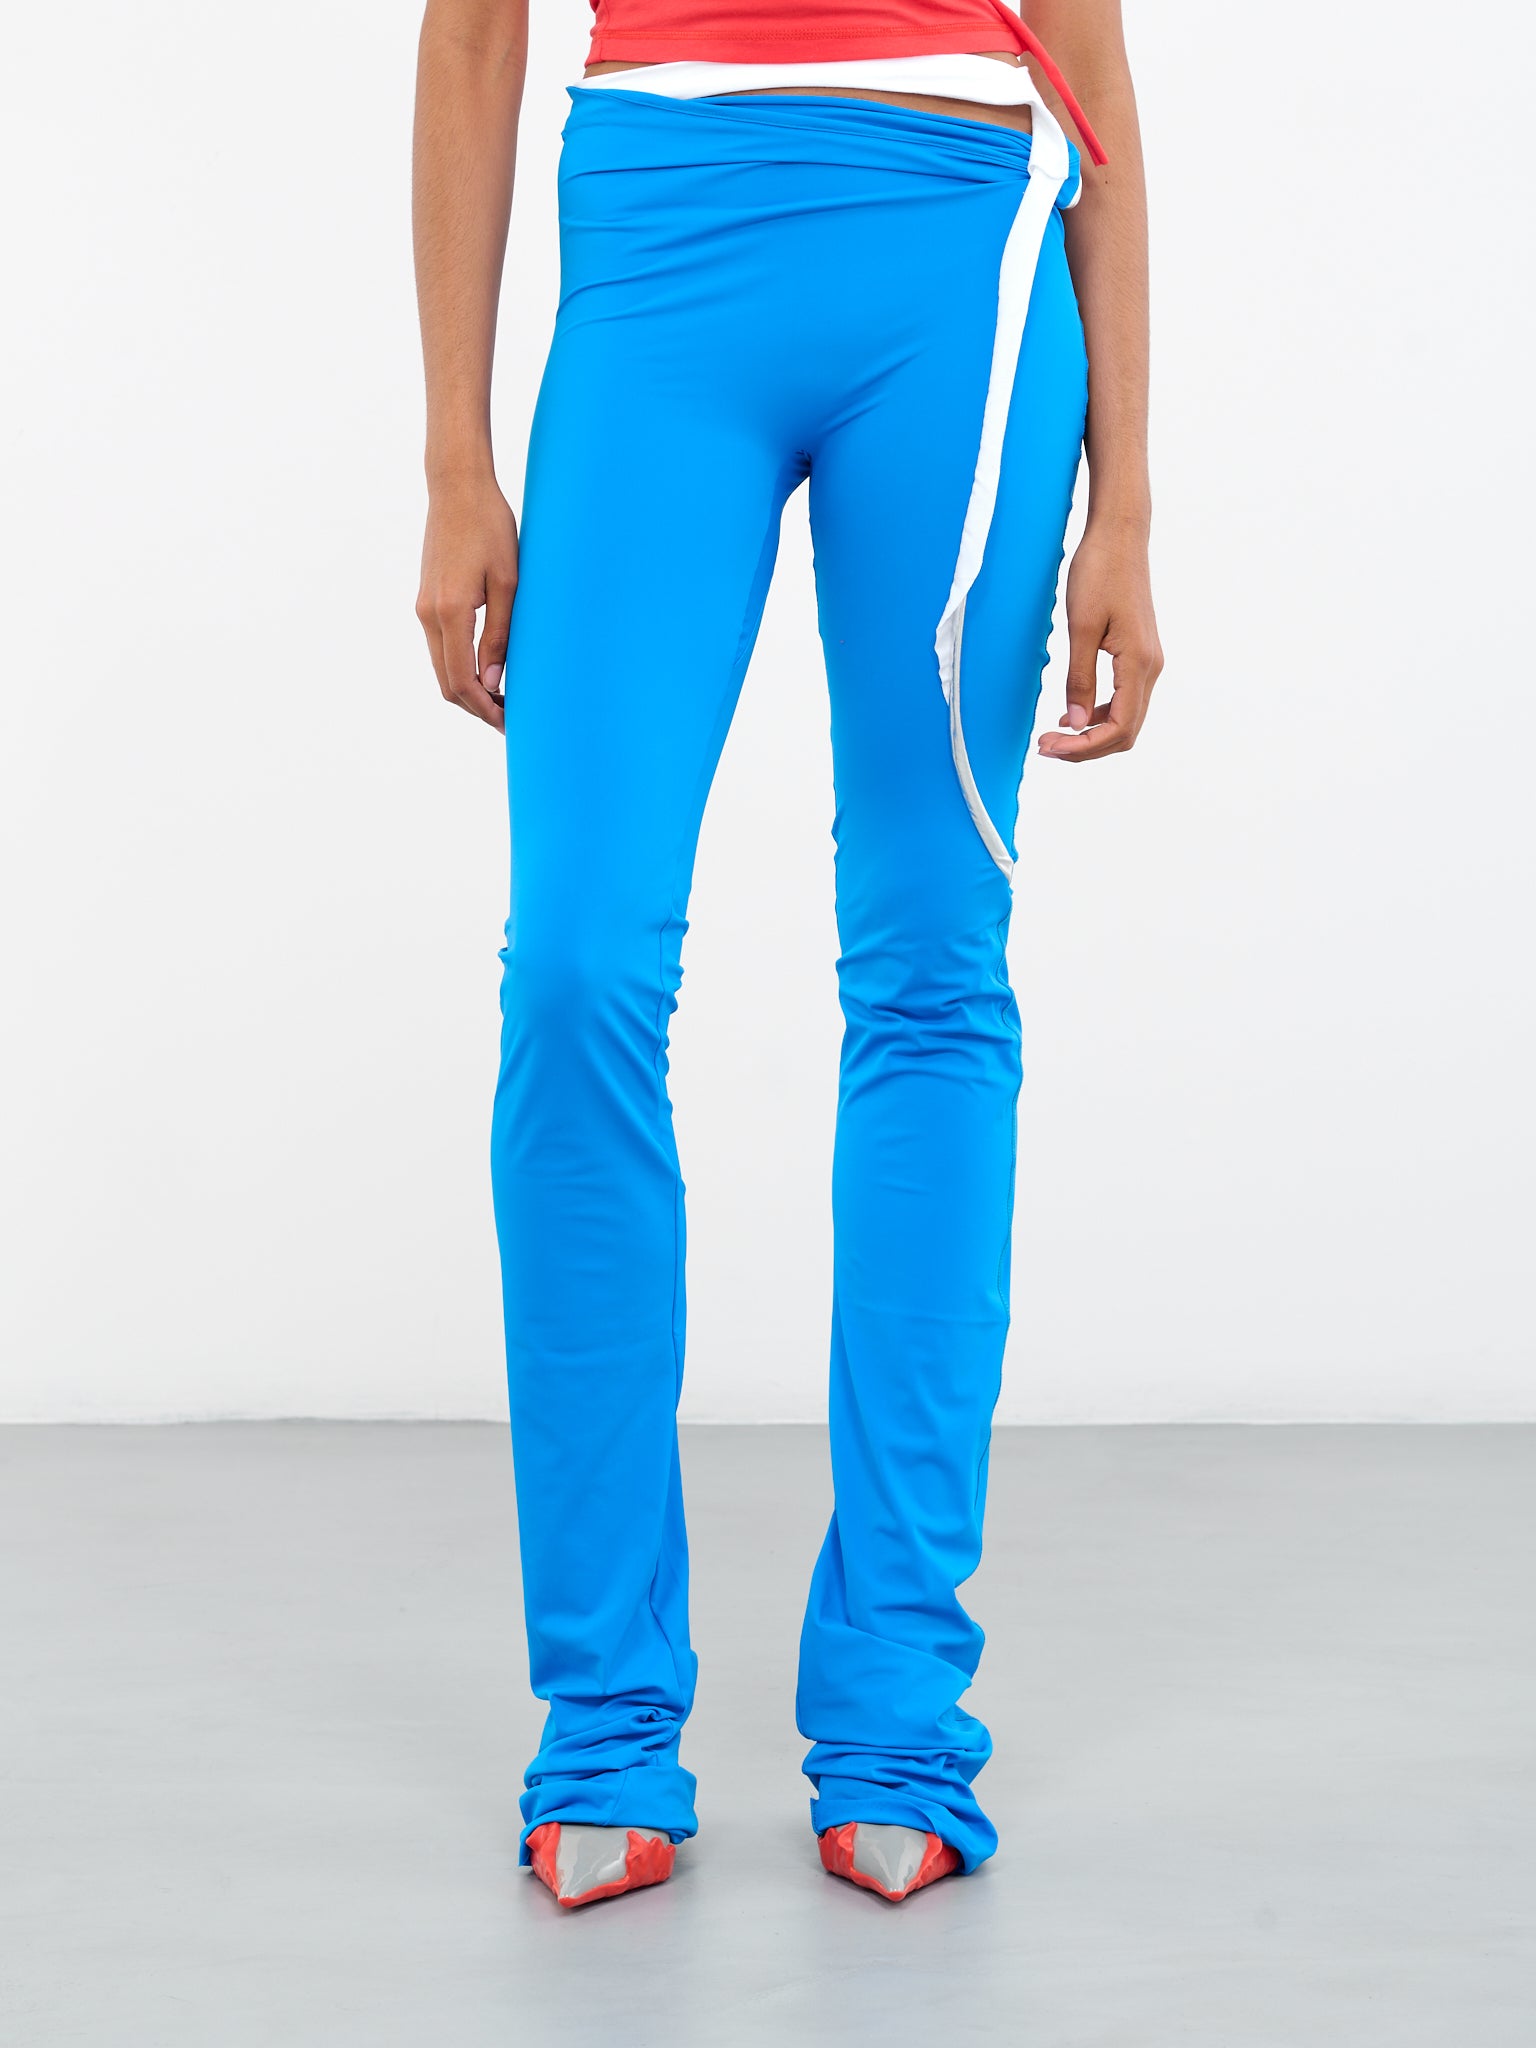 Buy Multicolured Pants for Women by DRAP Online